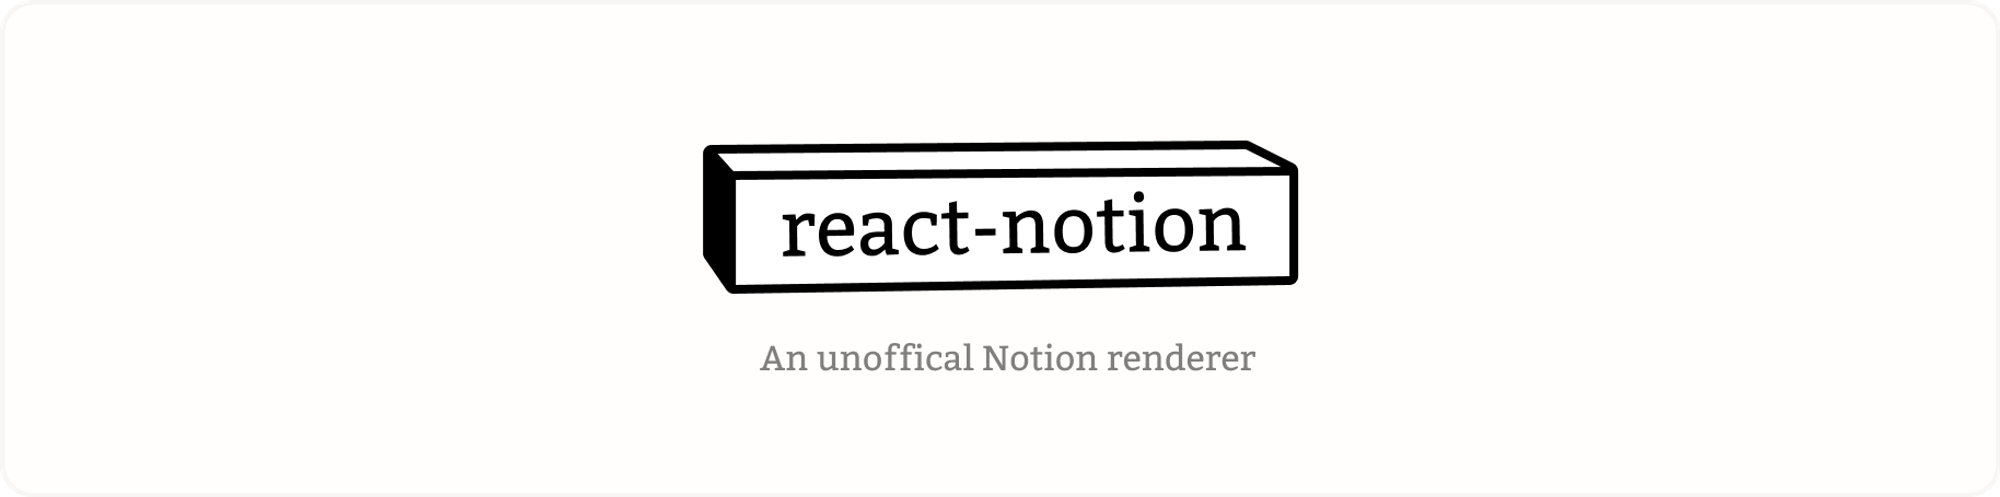 react-notion is born